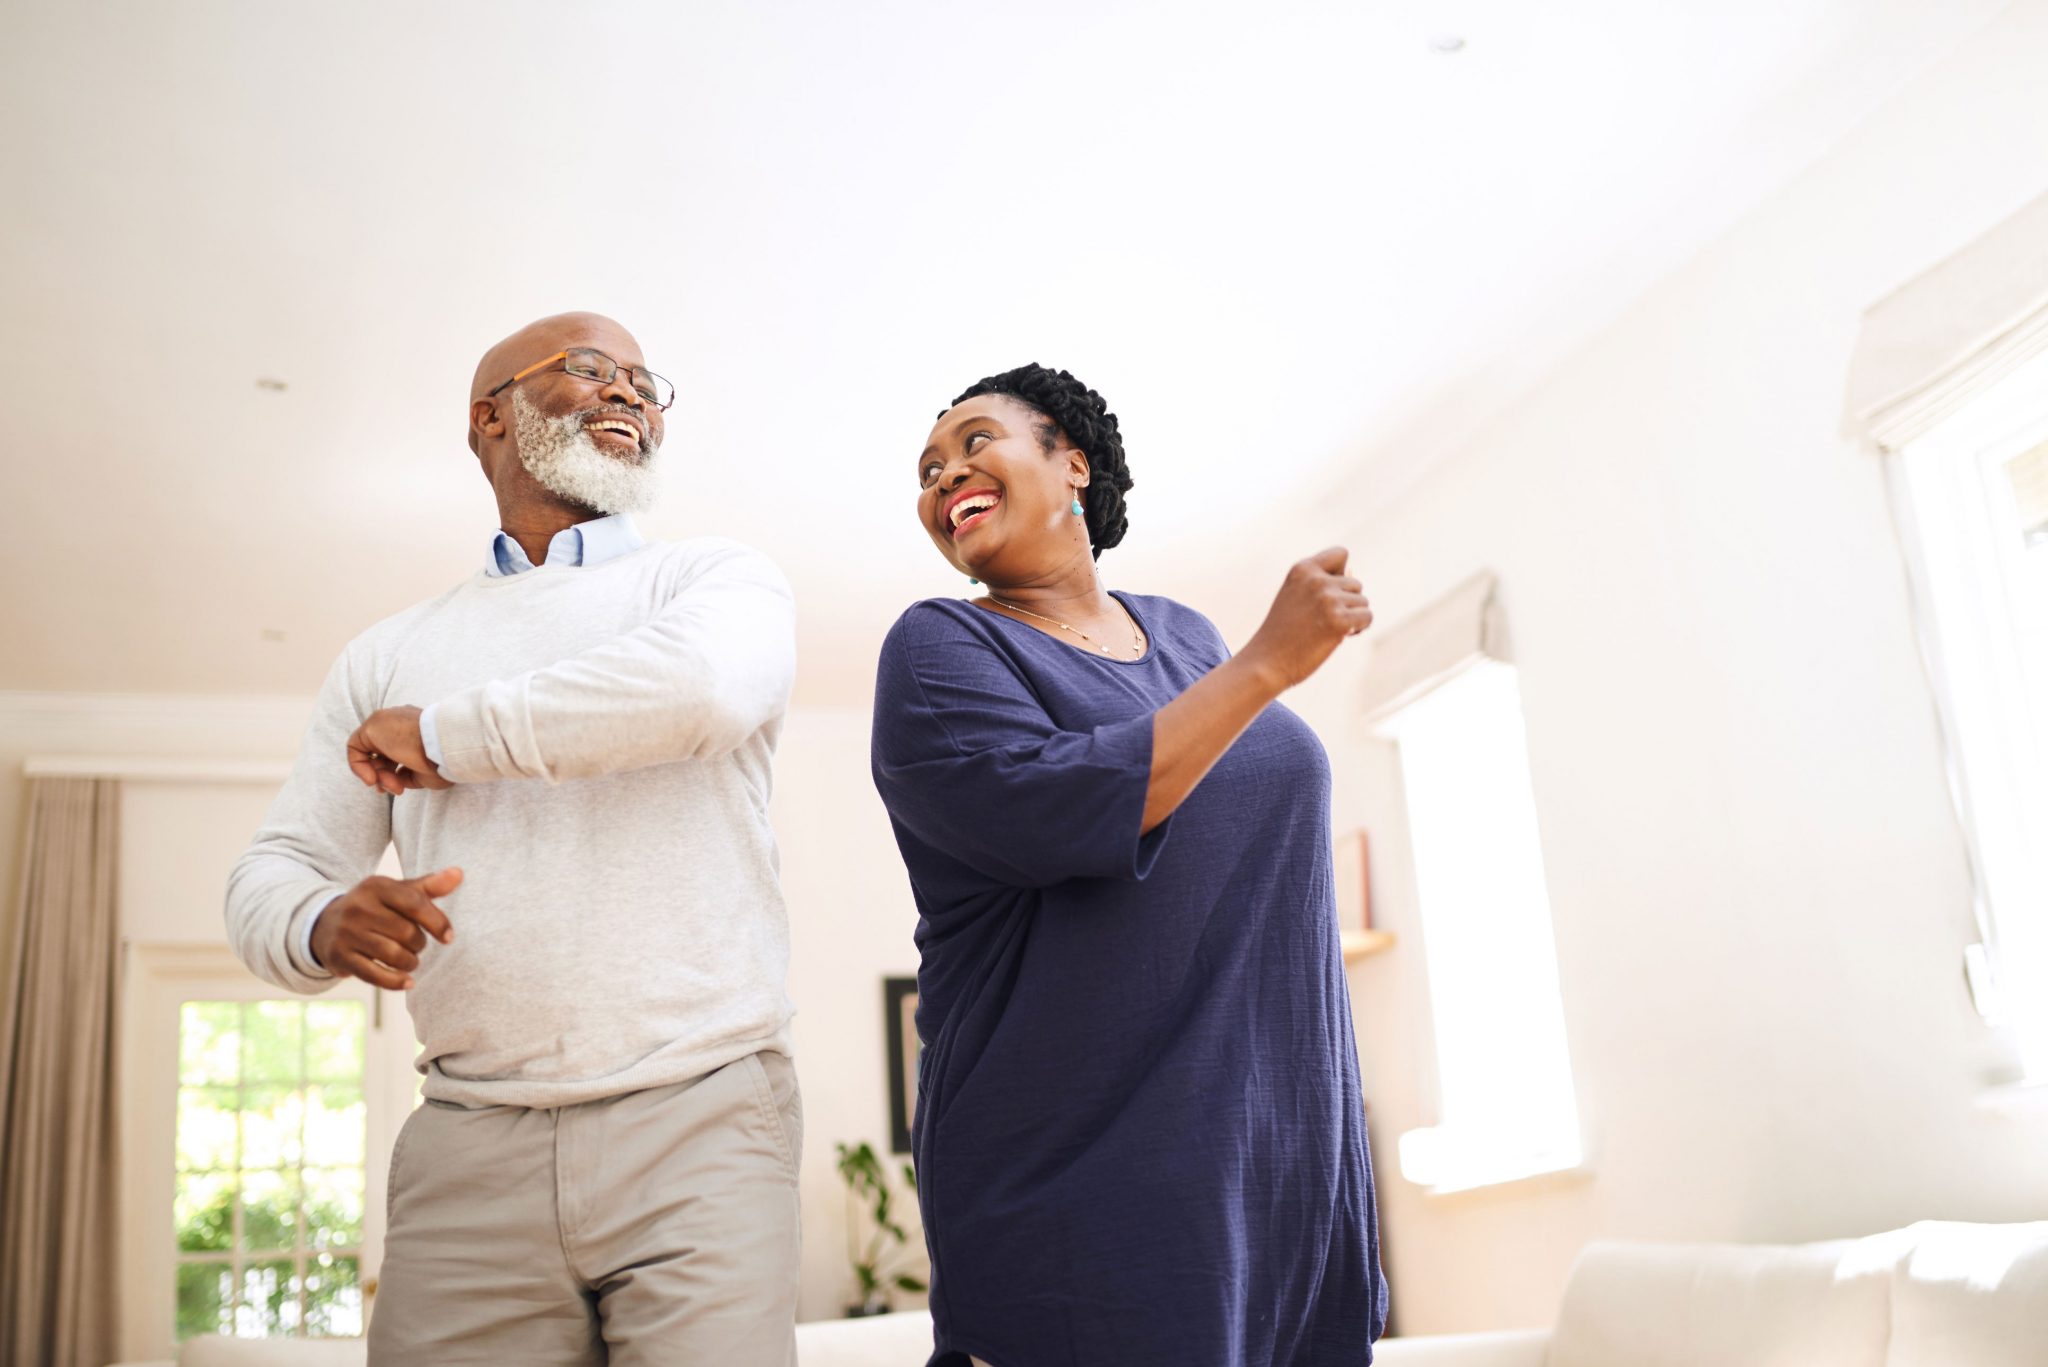 Two seniors dancing together in a bright living room, smiling with joy.